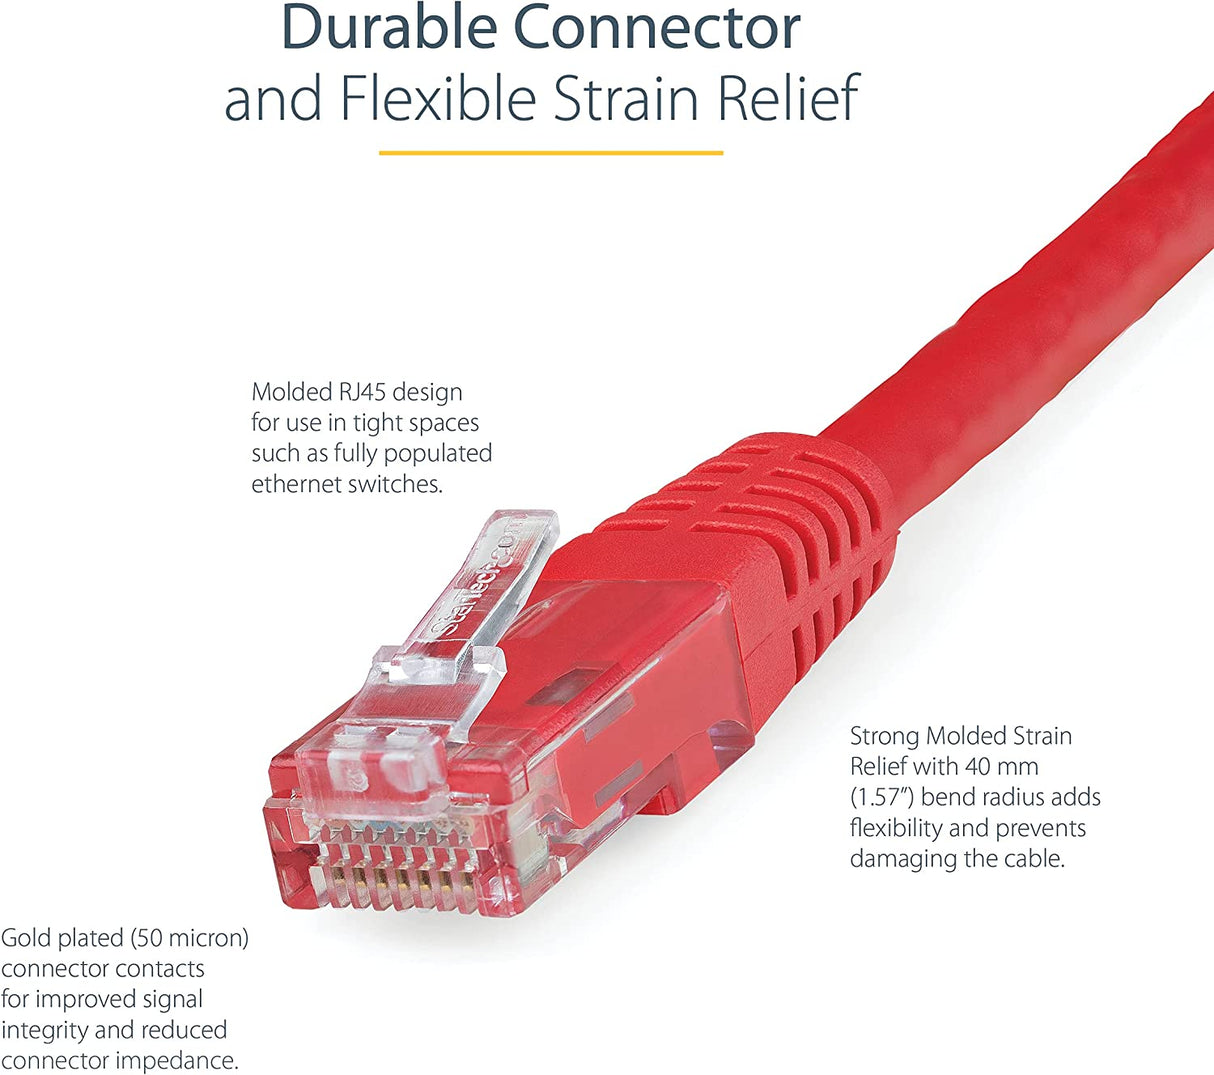 StarTech.com 25ft CAT6 Ethernet Cable - Red CAT 6 Gigabit Ethernet Wire -650MHz 100W PoE++ RJ45 UTP Molded Category 6 Network/Patch Cord w/Strain Relief/Fluke Tested UL/TIA Certified (C6PATCH25RD) Red 25 ft / 7.6 m 1 Pack